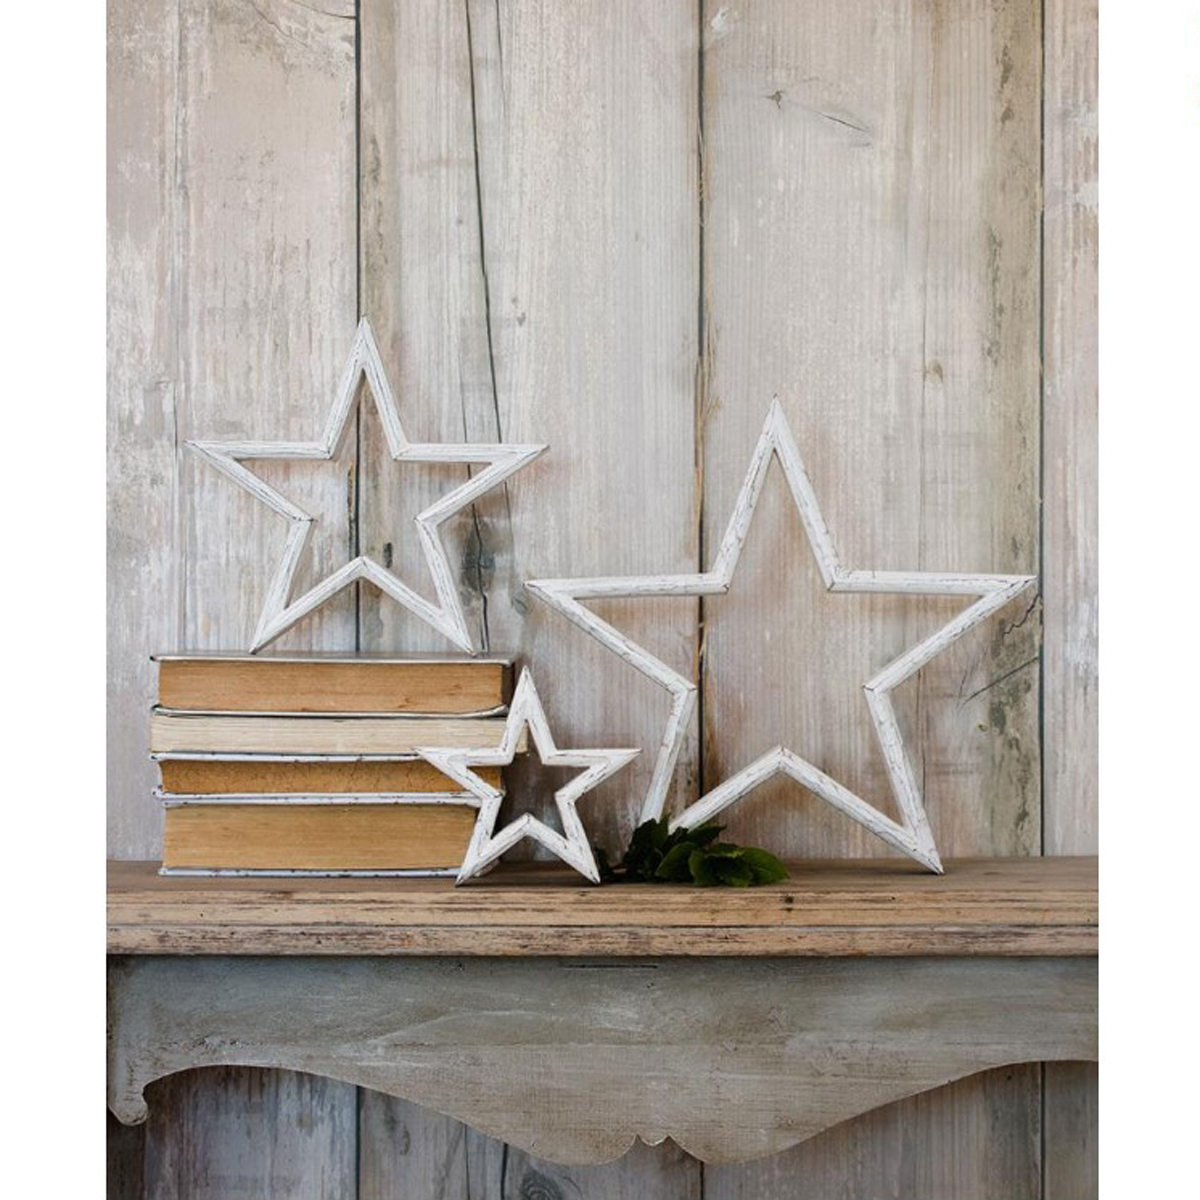 Set of 3 White Wooden Star Decorations - Interior Flair